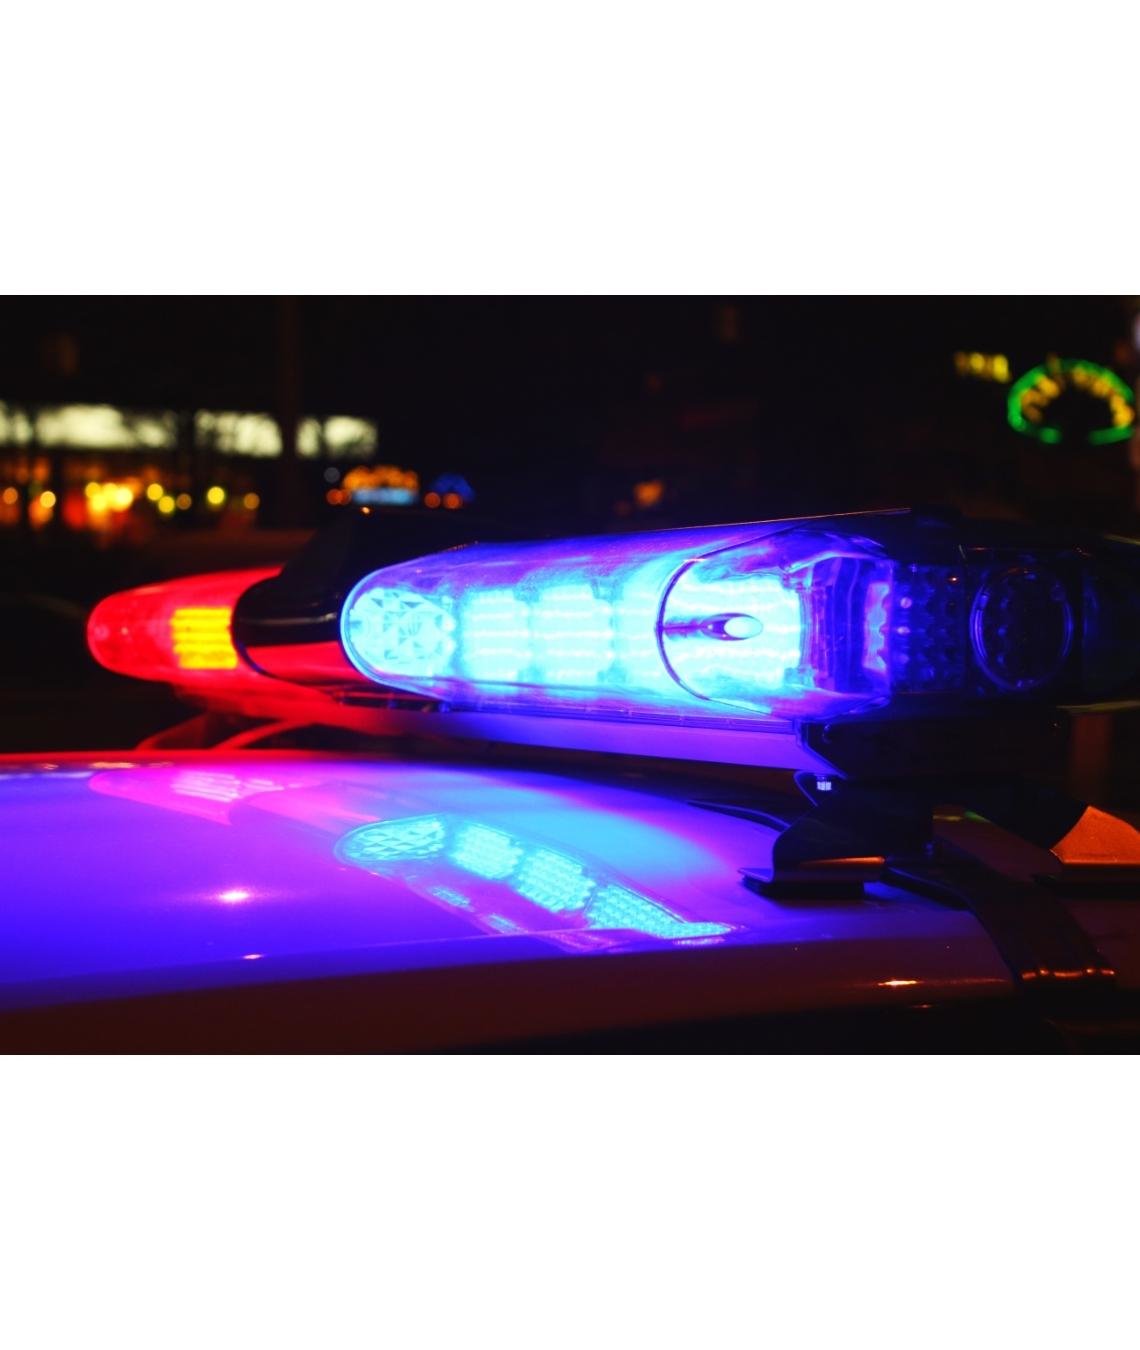 A passenger who was injured in a vehicle crash on Pamalee Drive on March 5 has died and the driver of the vehicle has been charged, the Fayetteville Police Department said.